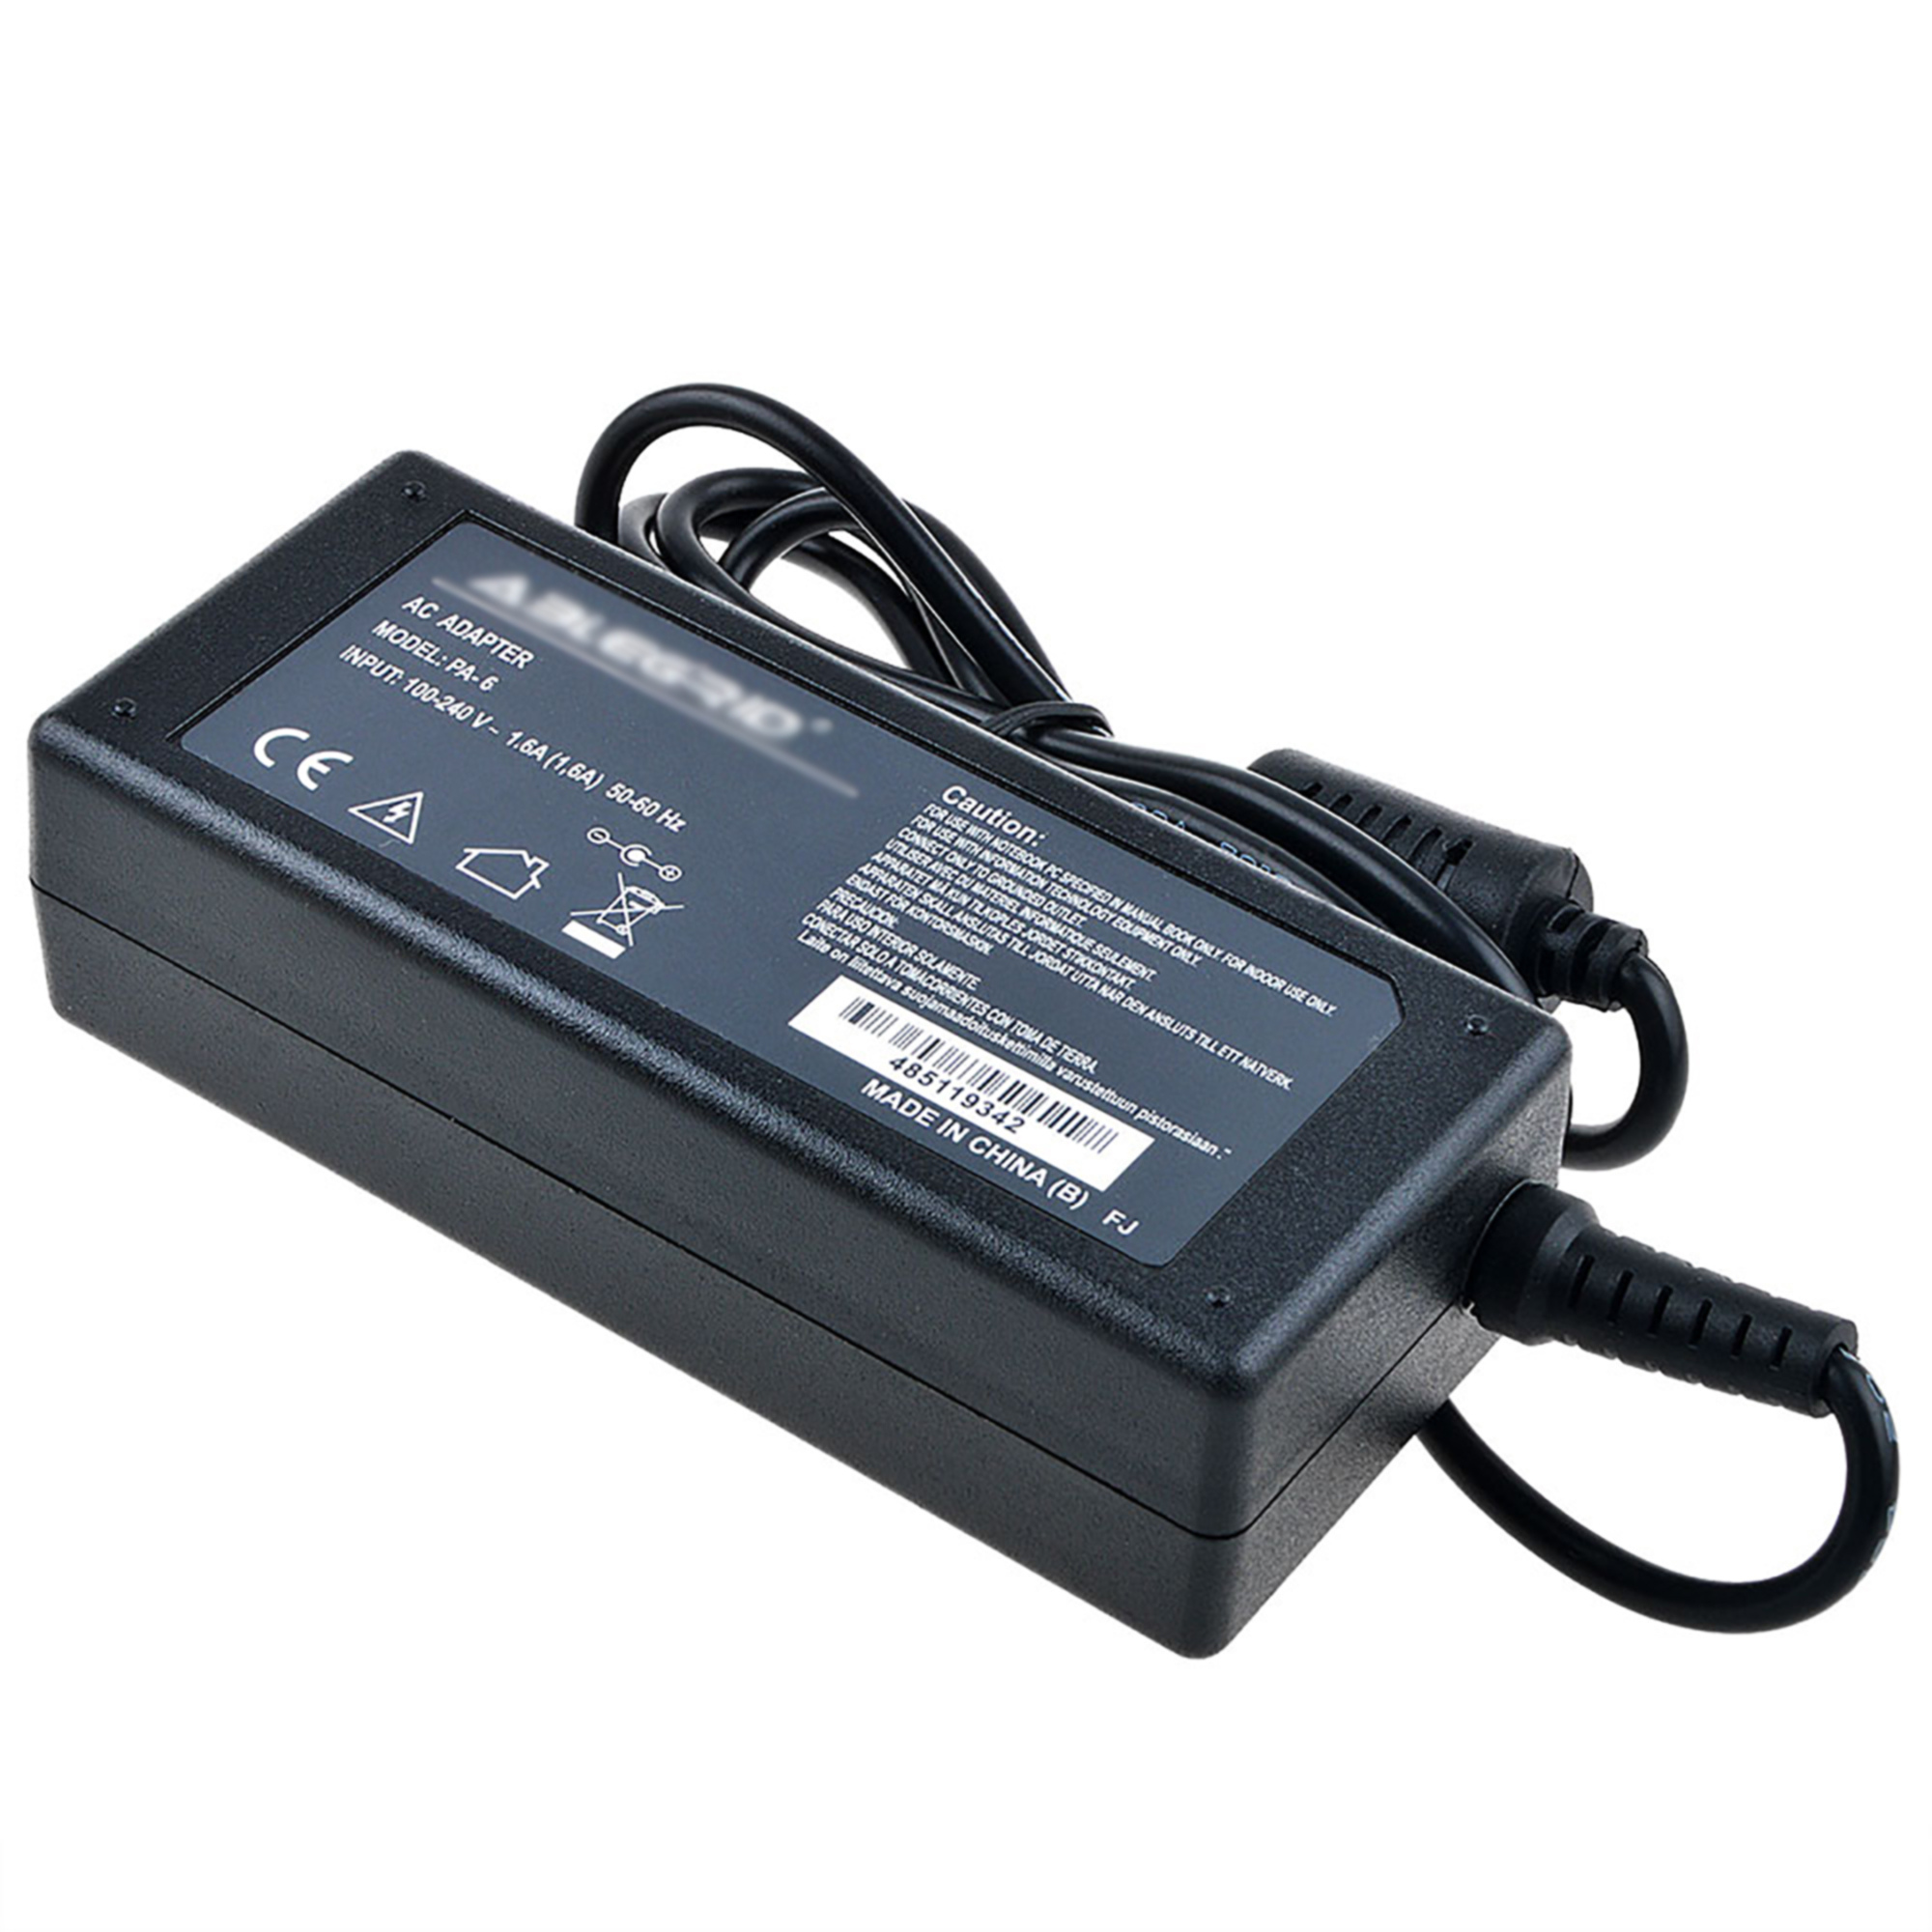 PKPOWER 65W DC Adapter Charger Replacement for Intel NUC NUC7I7BNH BOXNUC7I7BNH NUC7i5BNH PSU - image 3 of 5